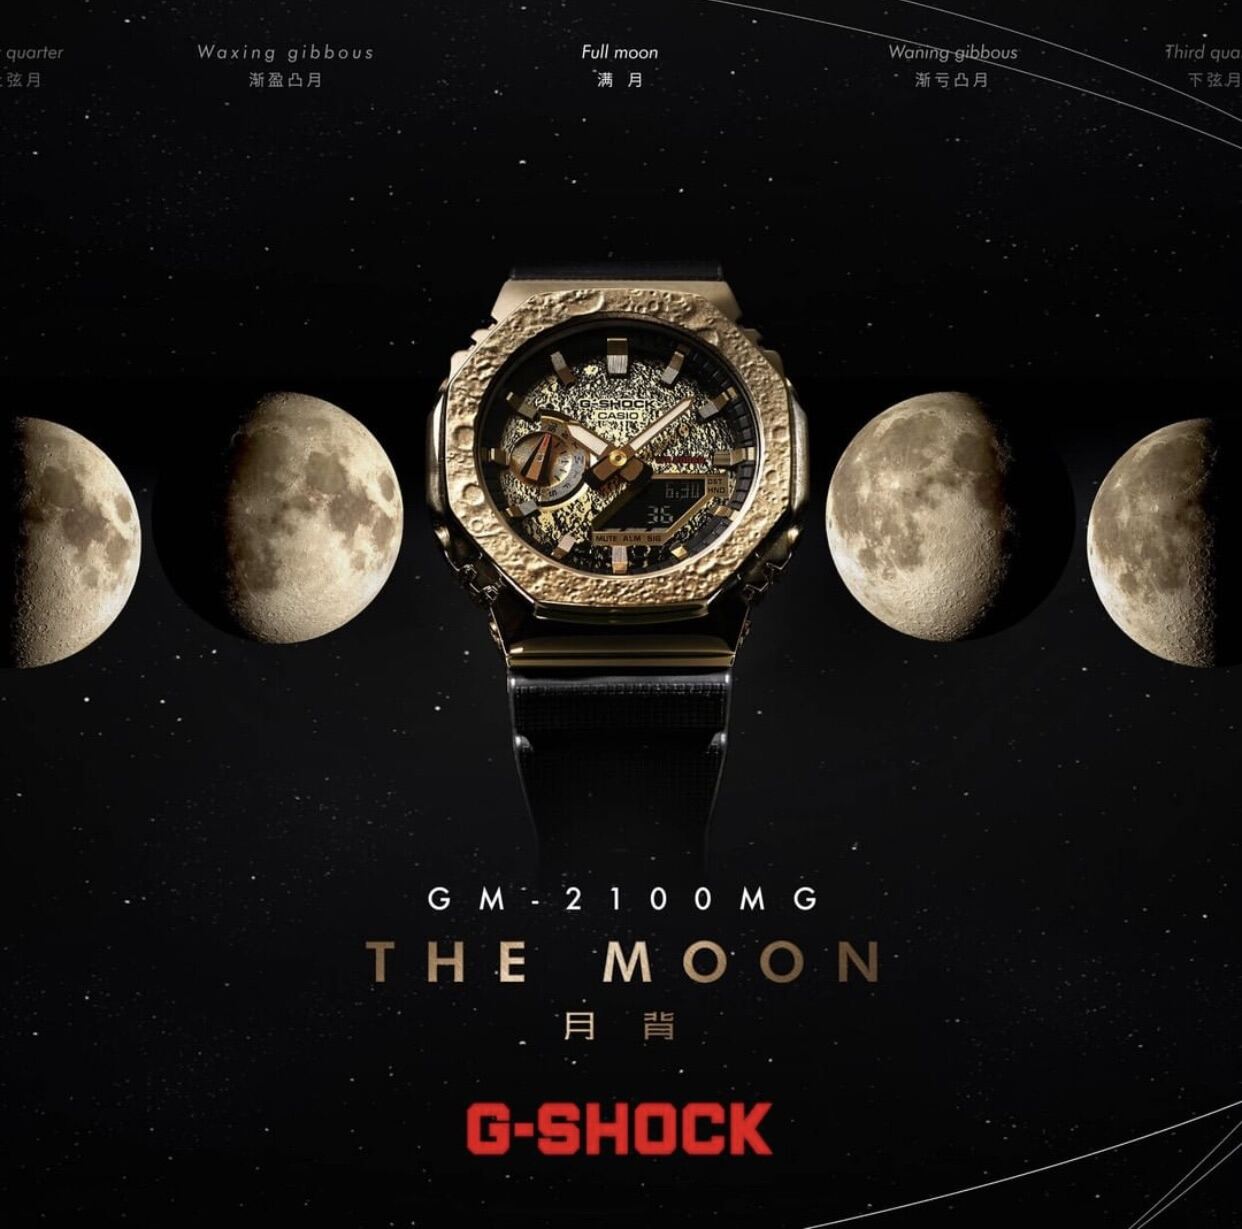 Original Marco] G-Shock GM-2100MG-1A The Moon Gold Black Limited